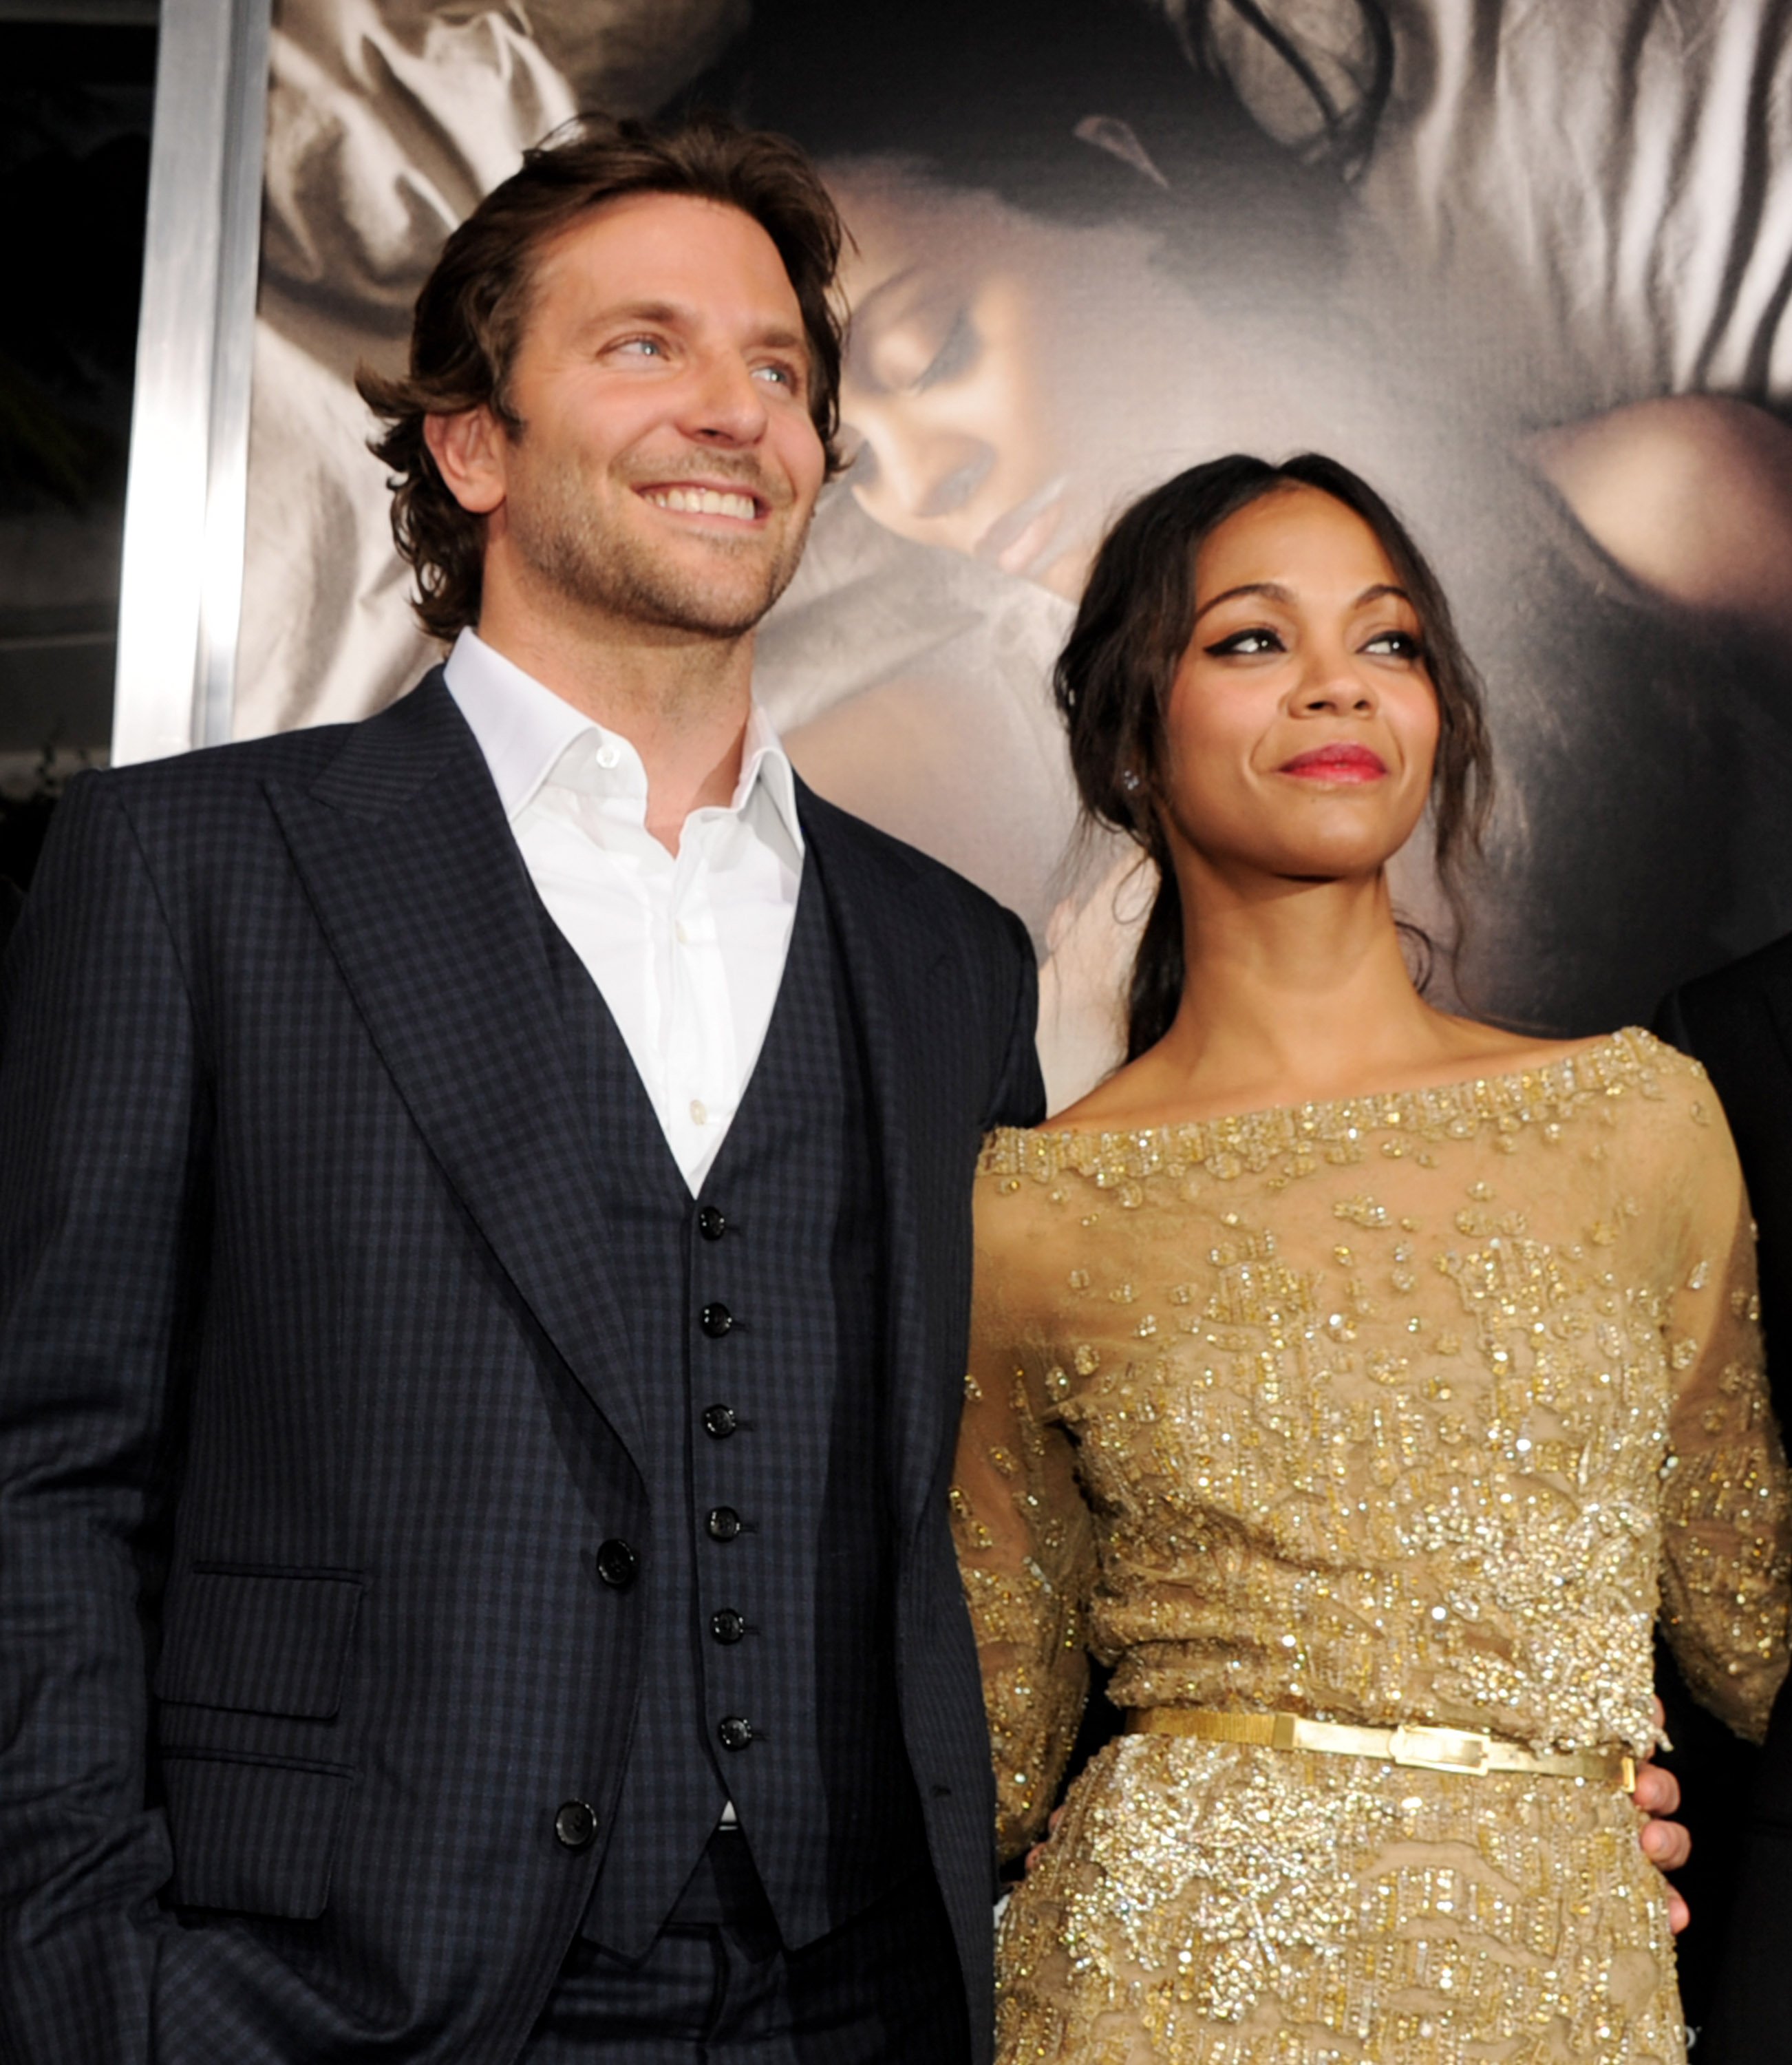 Bradley Cooper and Zoe Saldana at the premiere of CBS Films' "The Words" on September 4, 2012, in Los Angeles, California. | Source: Getty Images